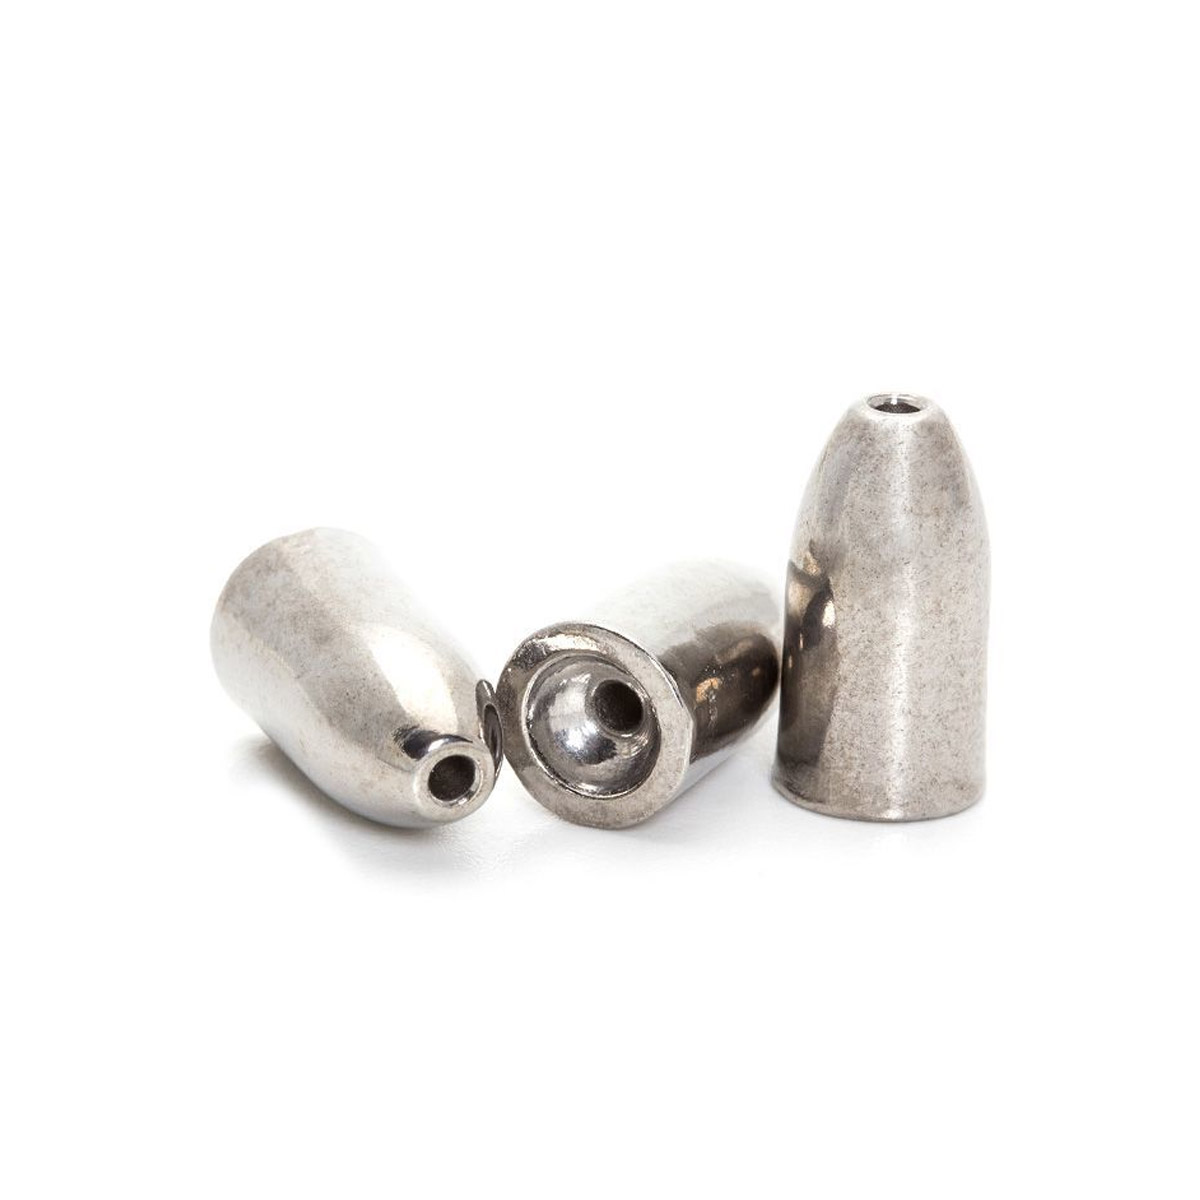 Camo Tackle Tungsten Bullet Weights Plain